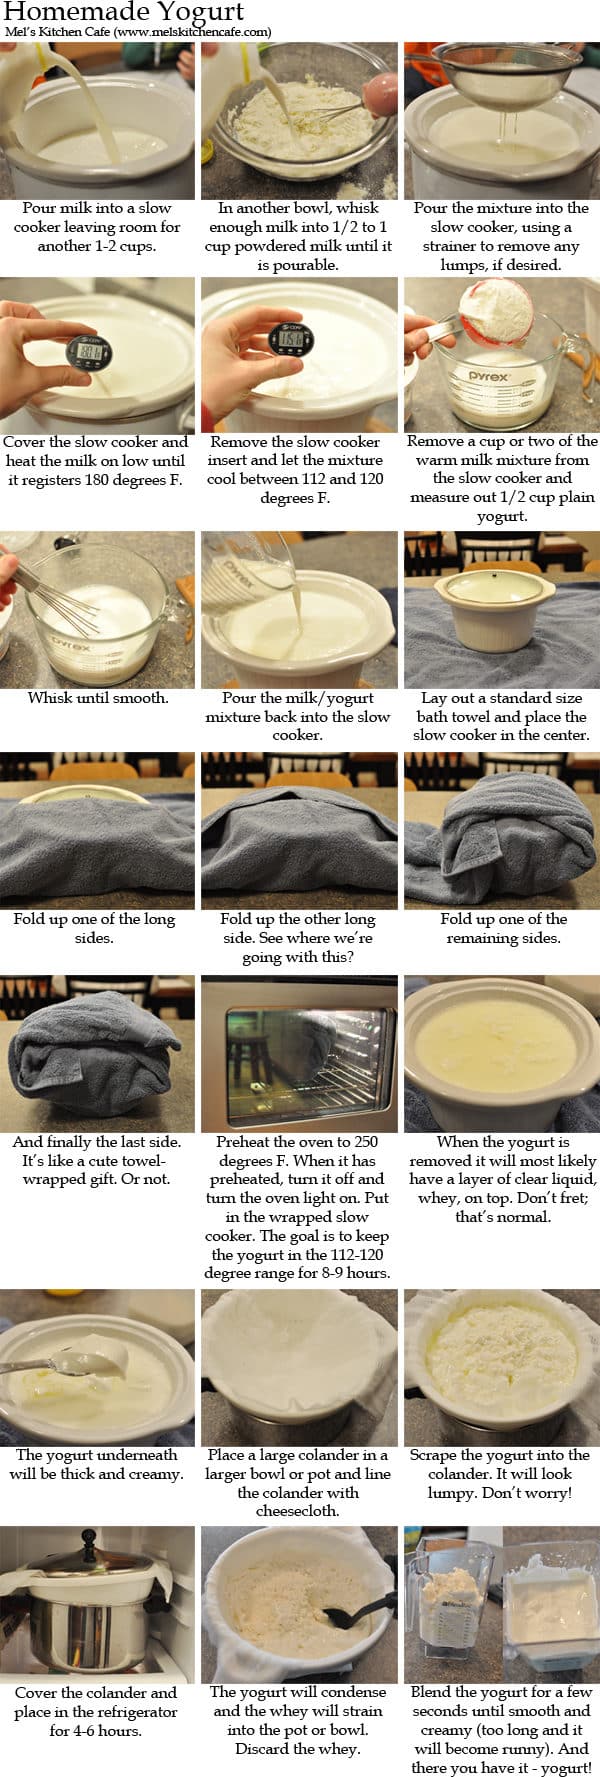 a collage of pictures and instructions showing how to make homemade yogurt step-by-step